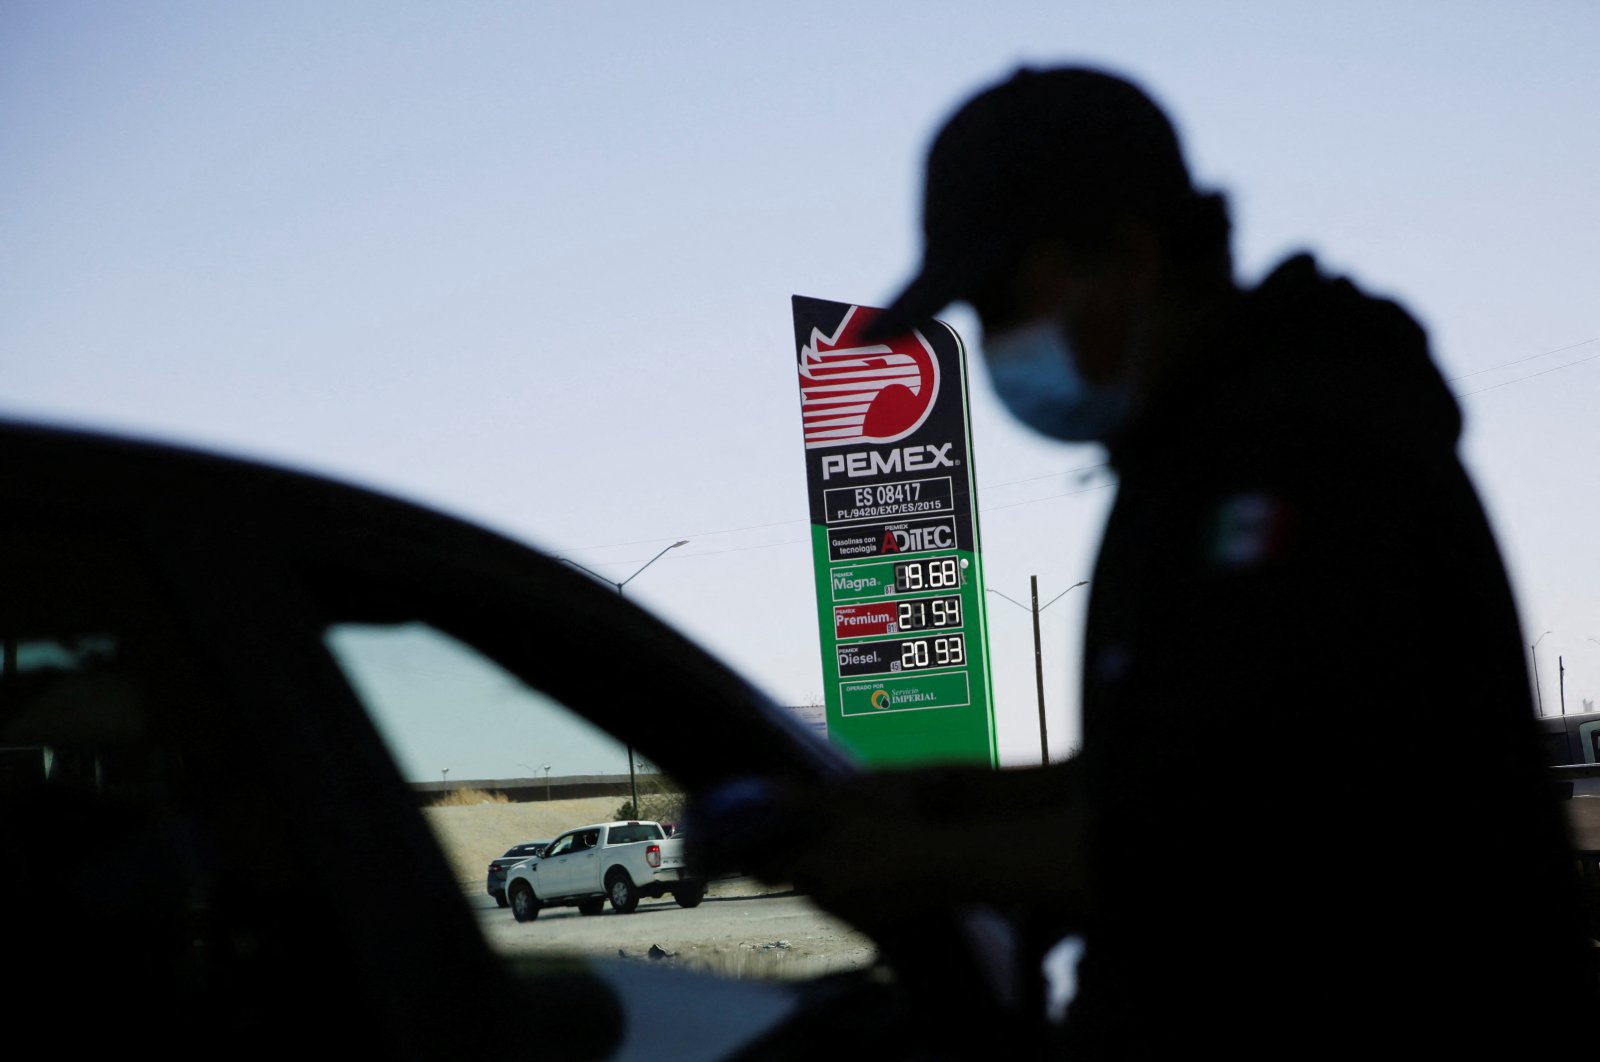 A sign of Mexican state oil company Petroleos Mexicanos (PEMEX) shows their prices of the gasoline at a service station after Mexico suspended a week of gasoline subsidy along the U.S. border, in Ciudad Juarez, Mexico, April 2, 2022. (Reuters Photo)